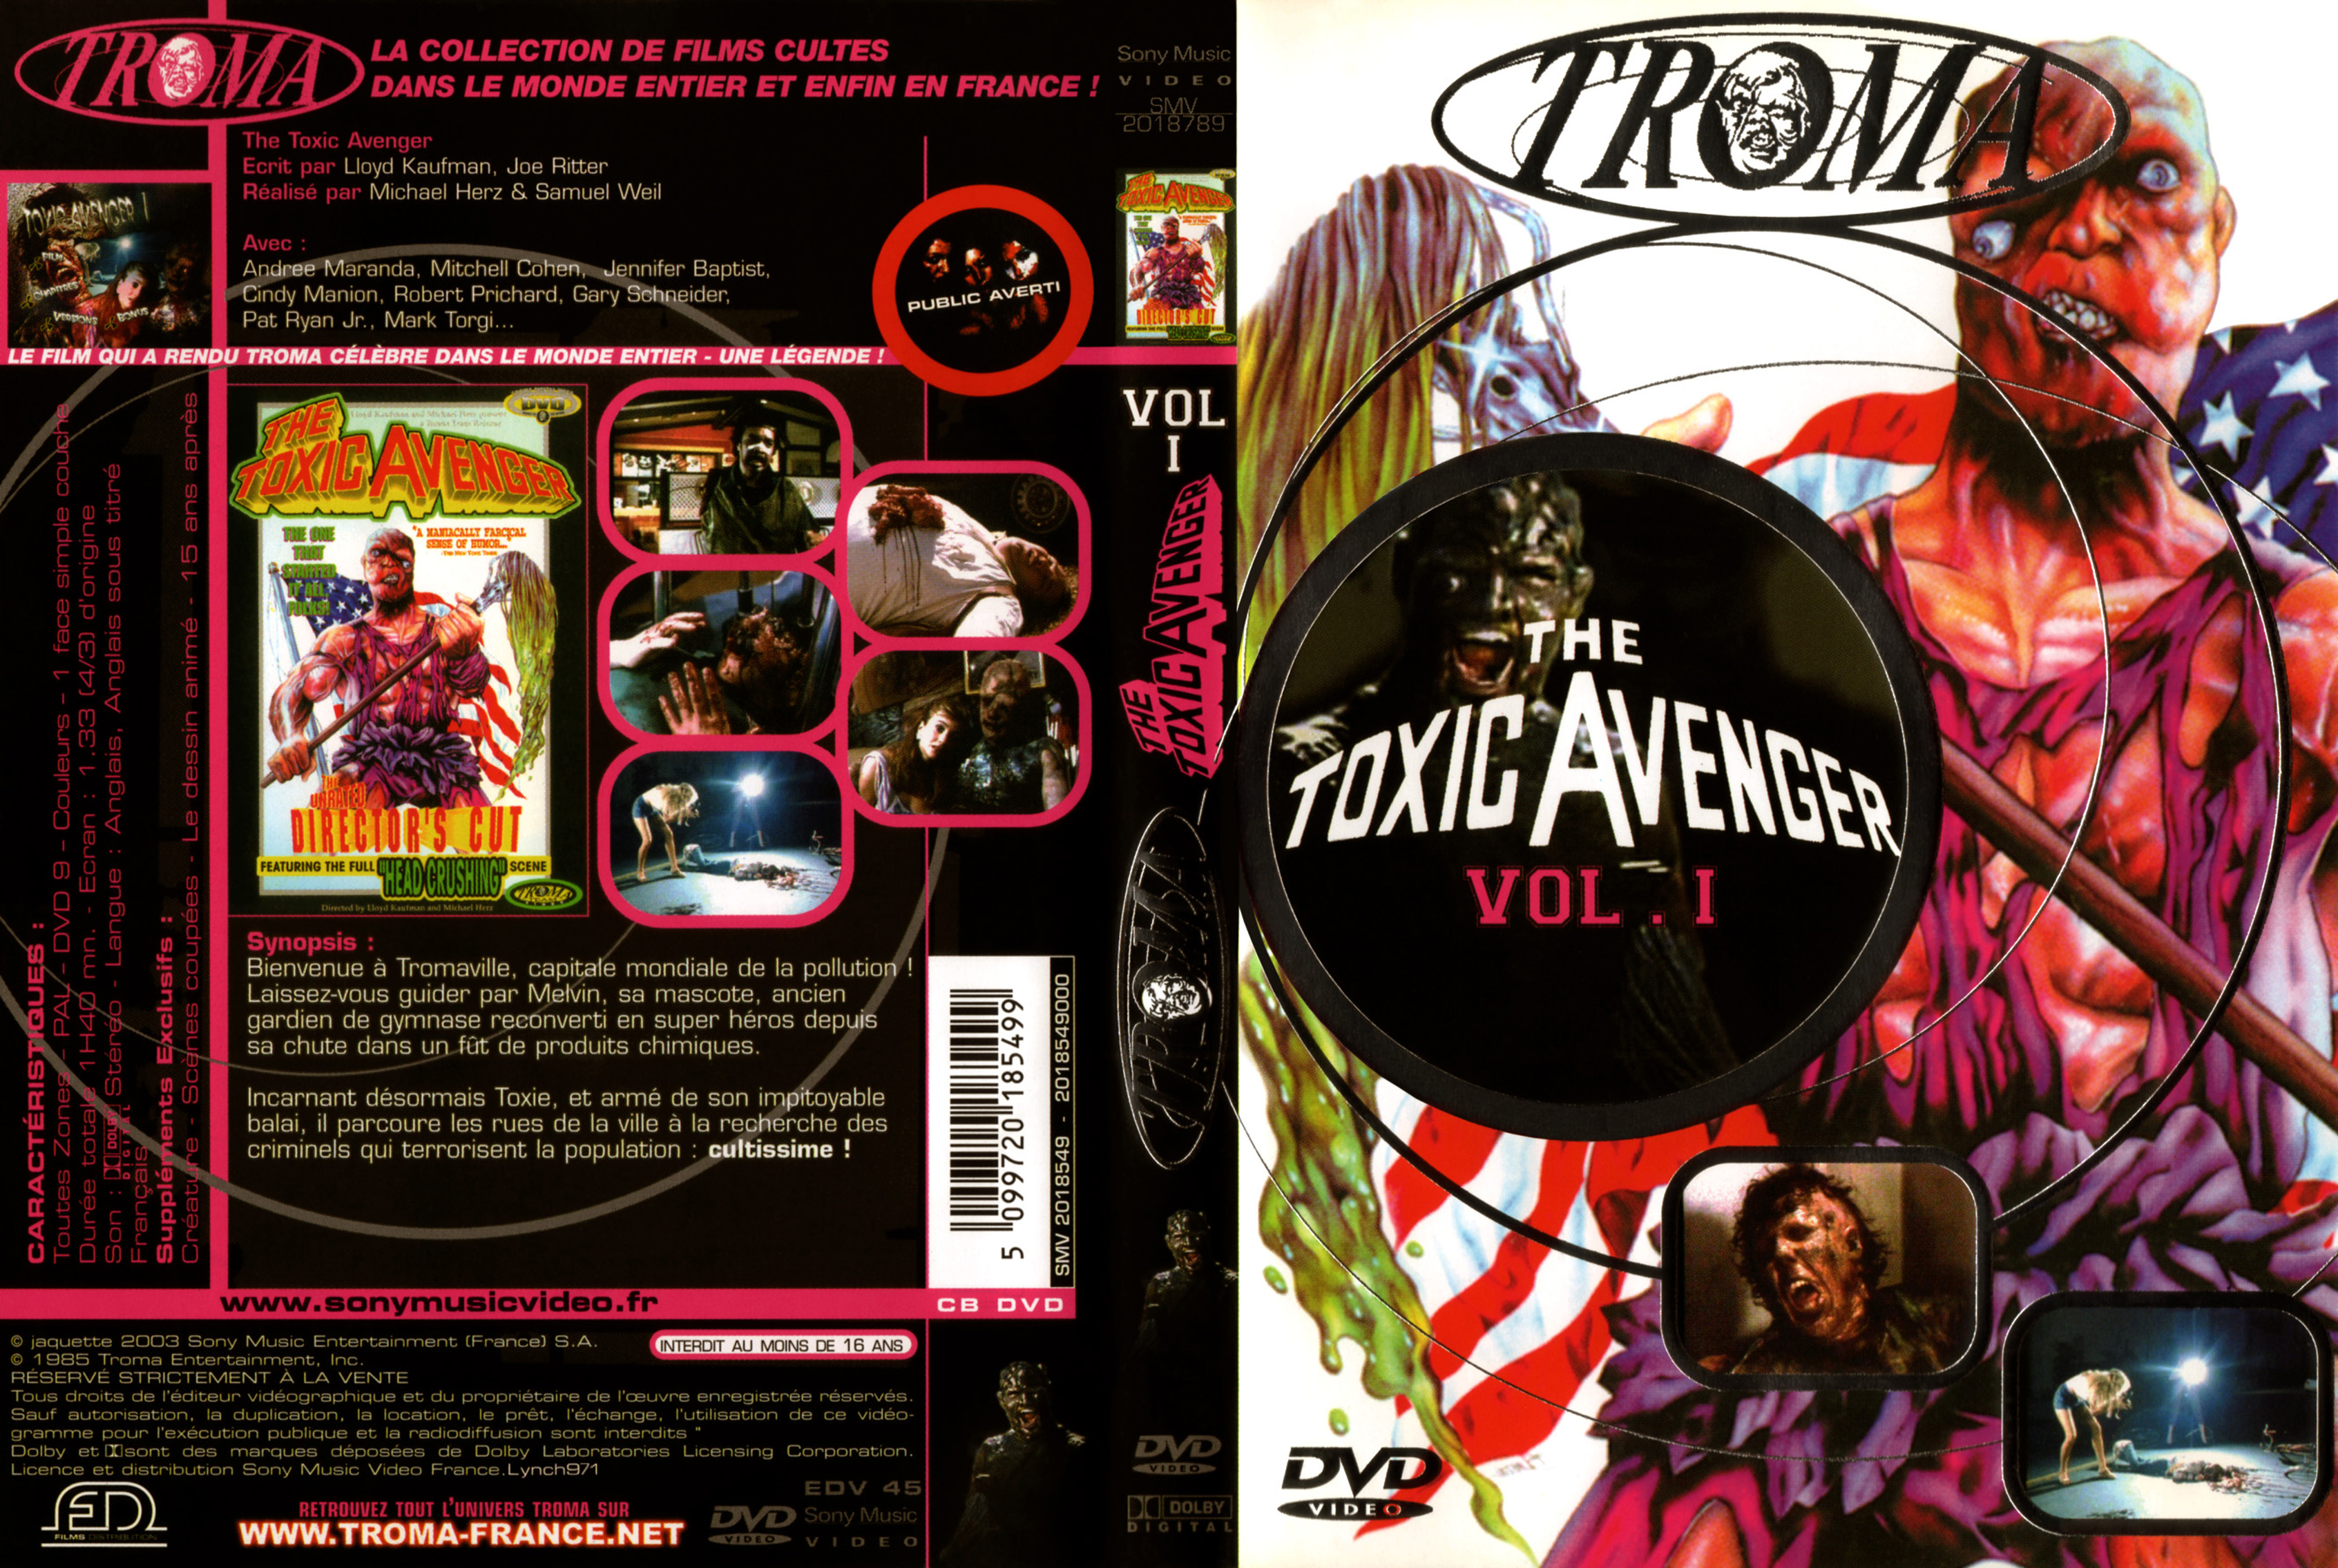 Jaquette DVD The toxic avenger vol 01